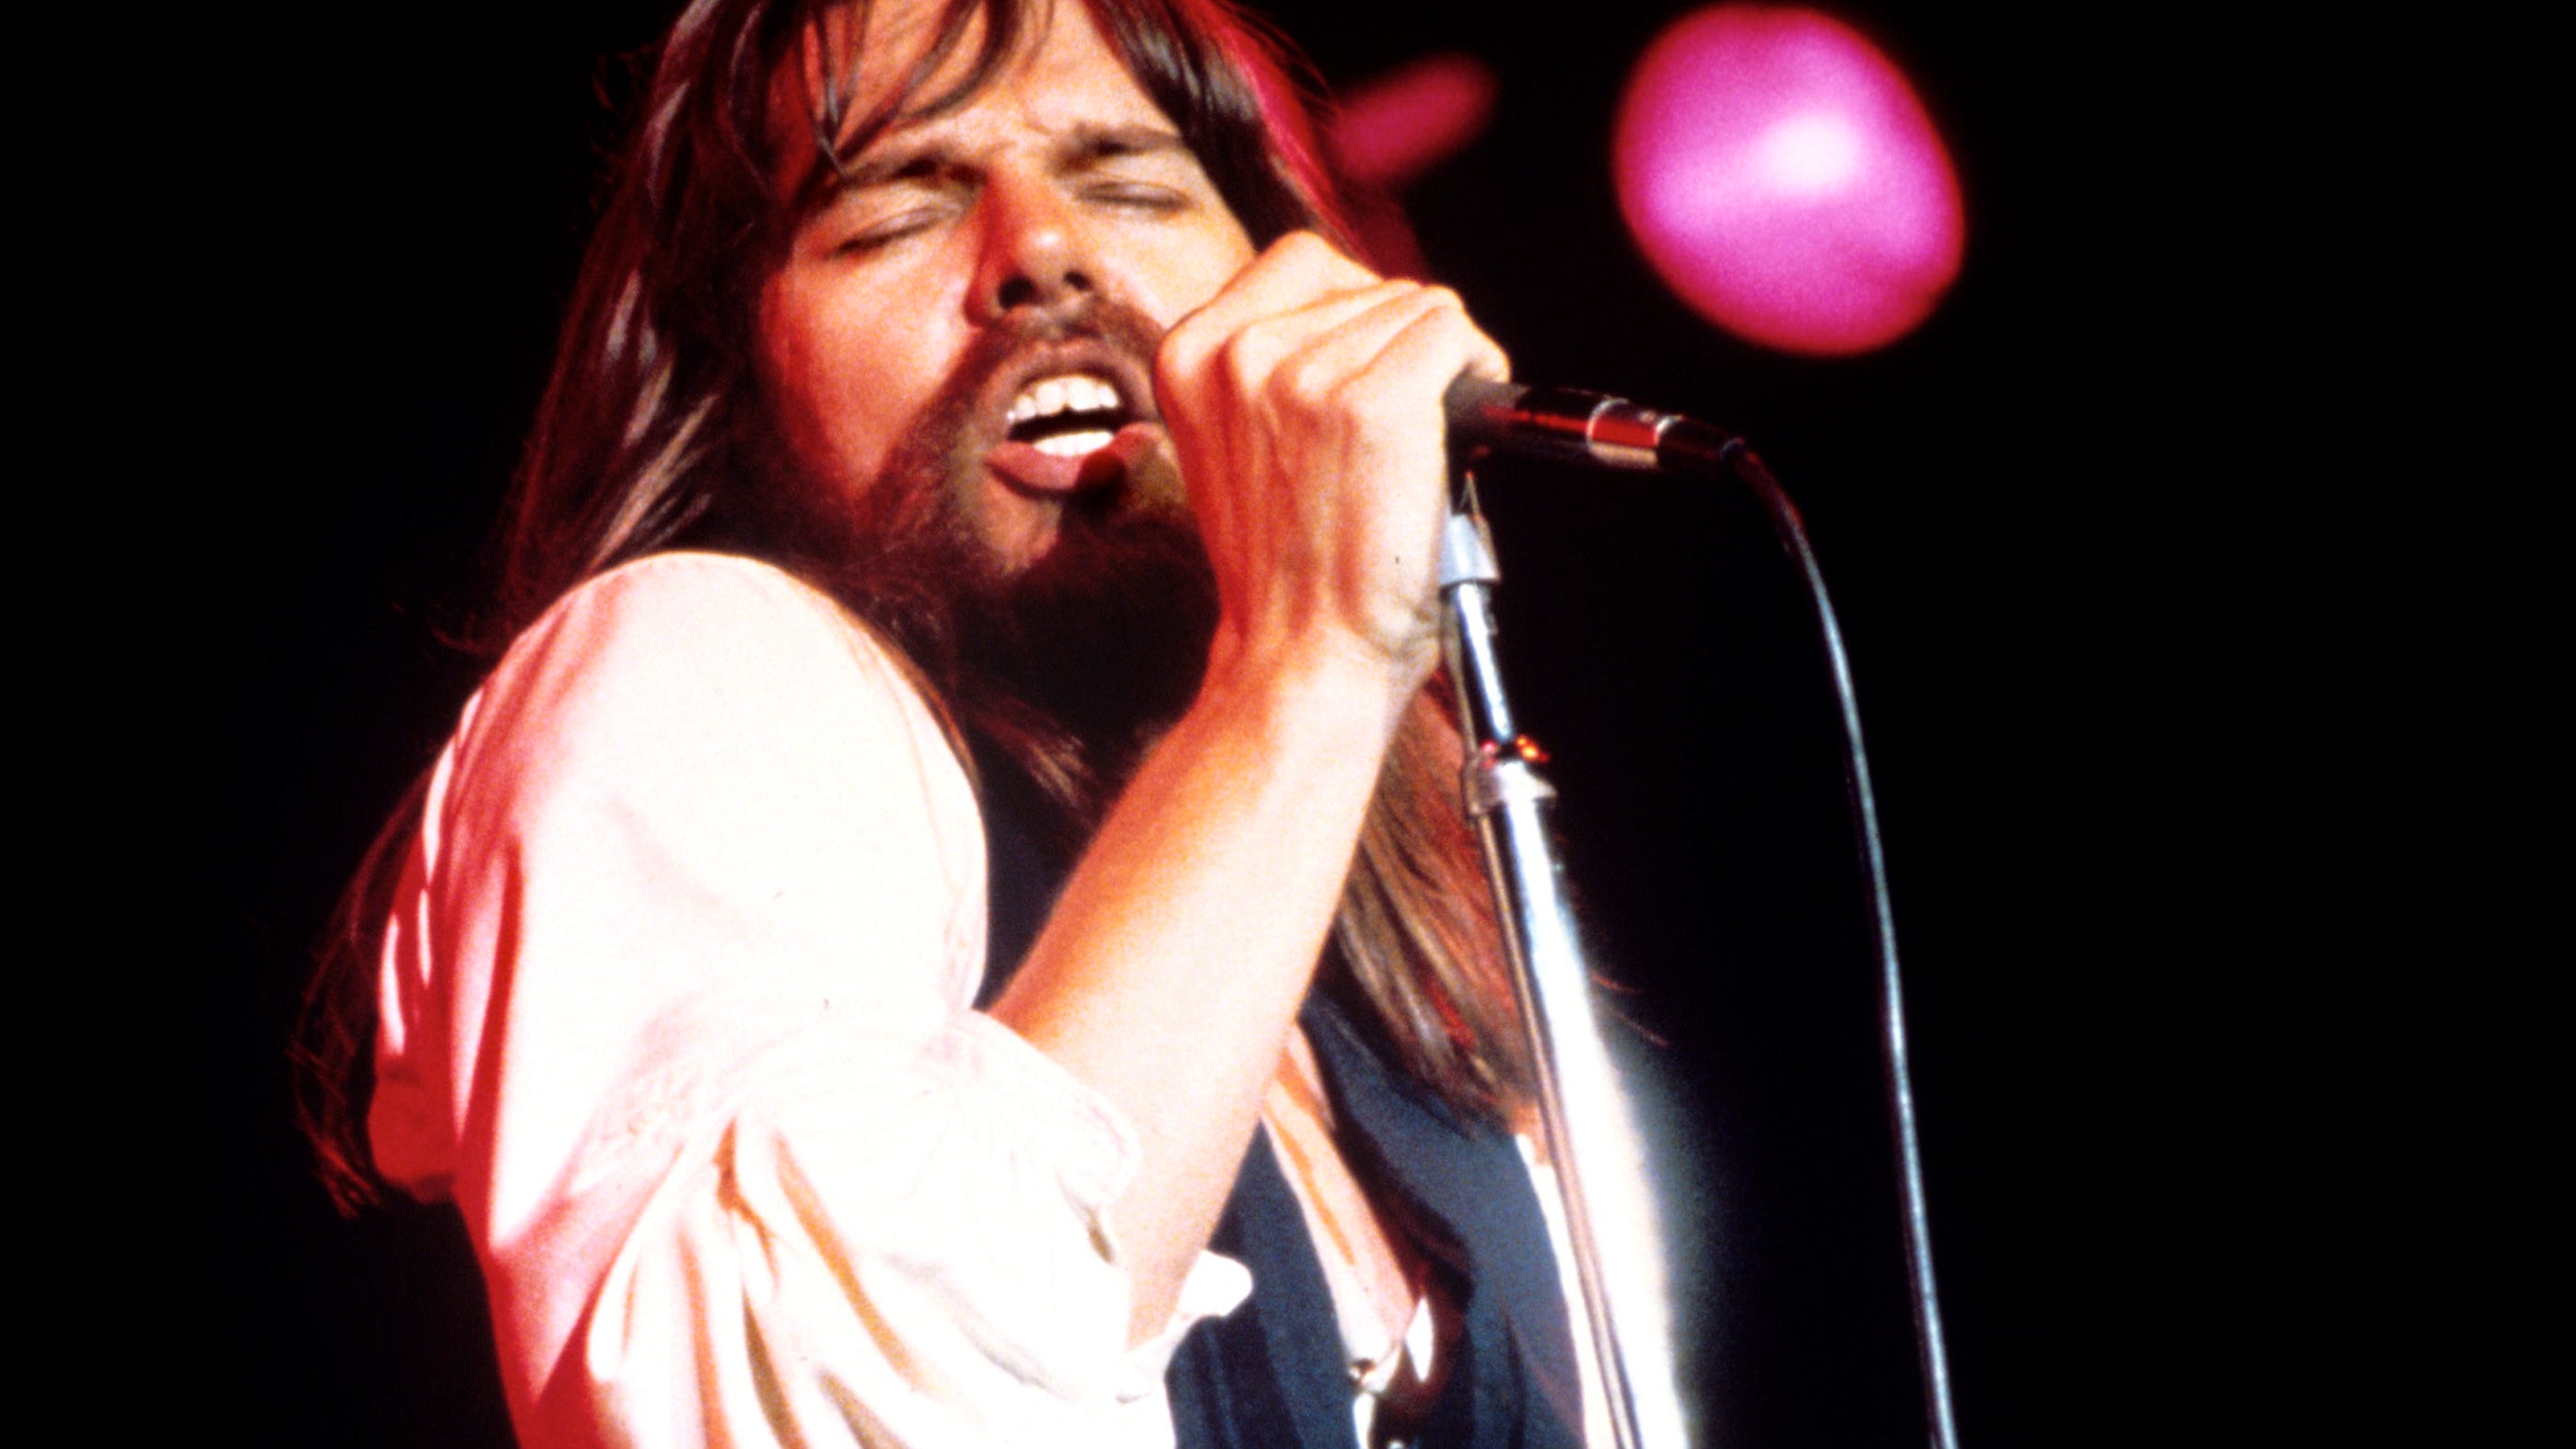 Bob Seger launches official YouTube channel with 'Night Moves' video